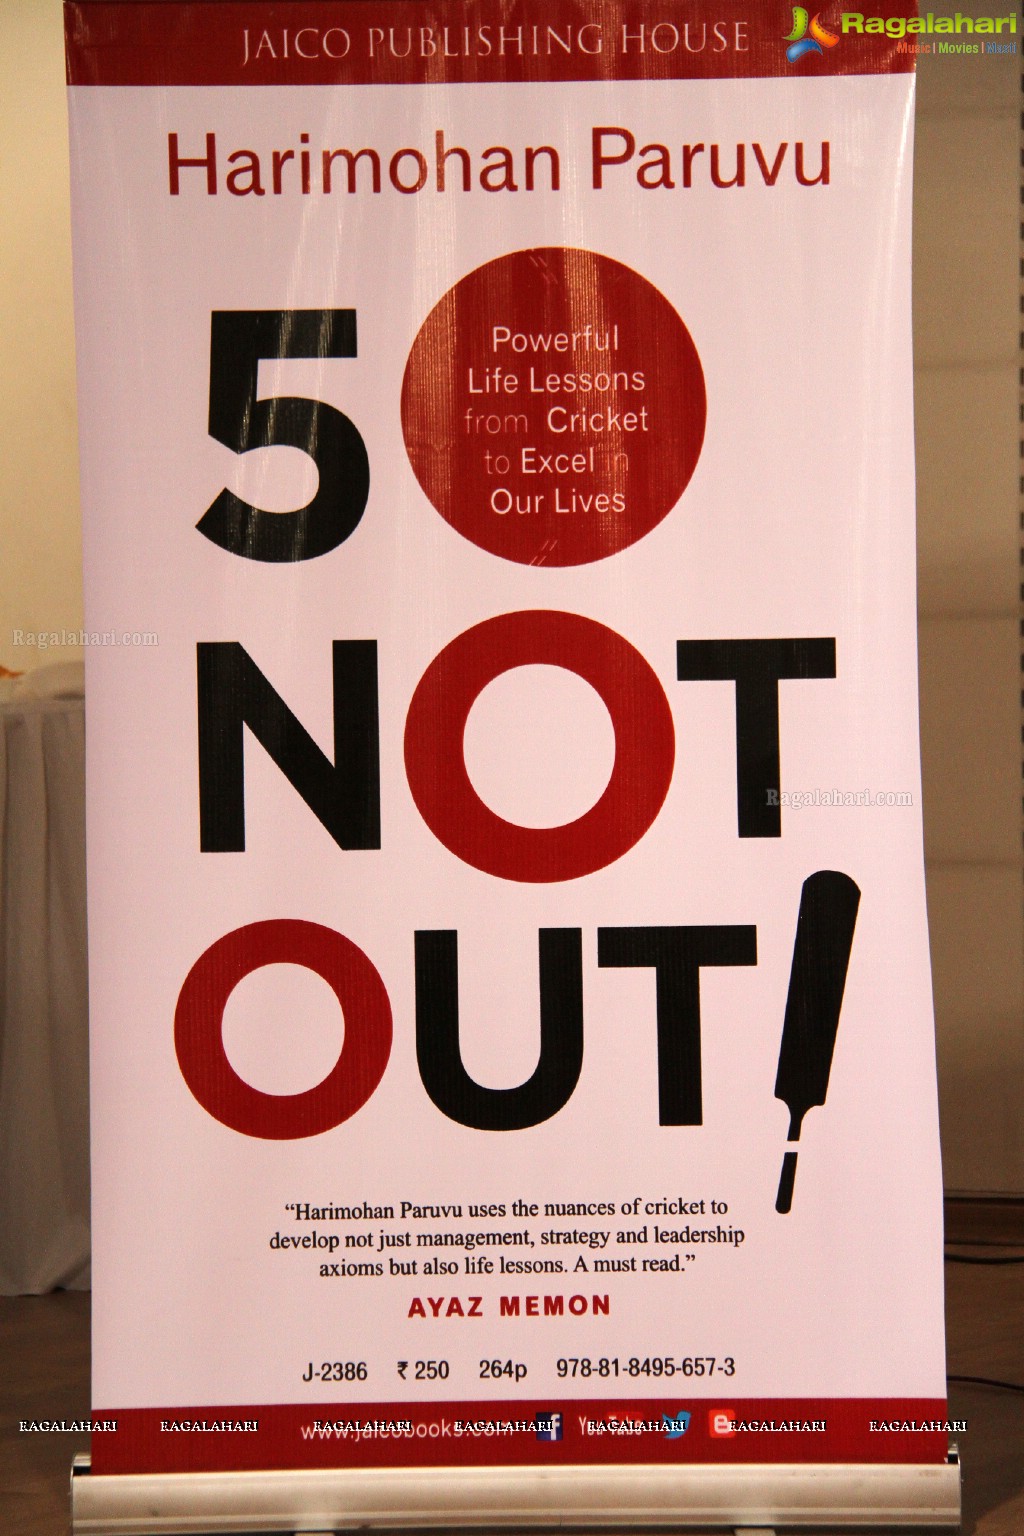 50 Not Out Book Launch